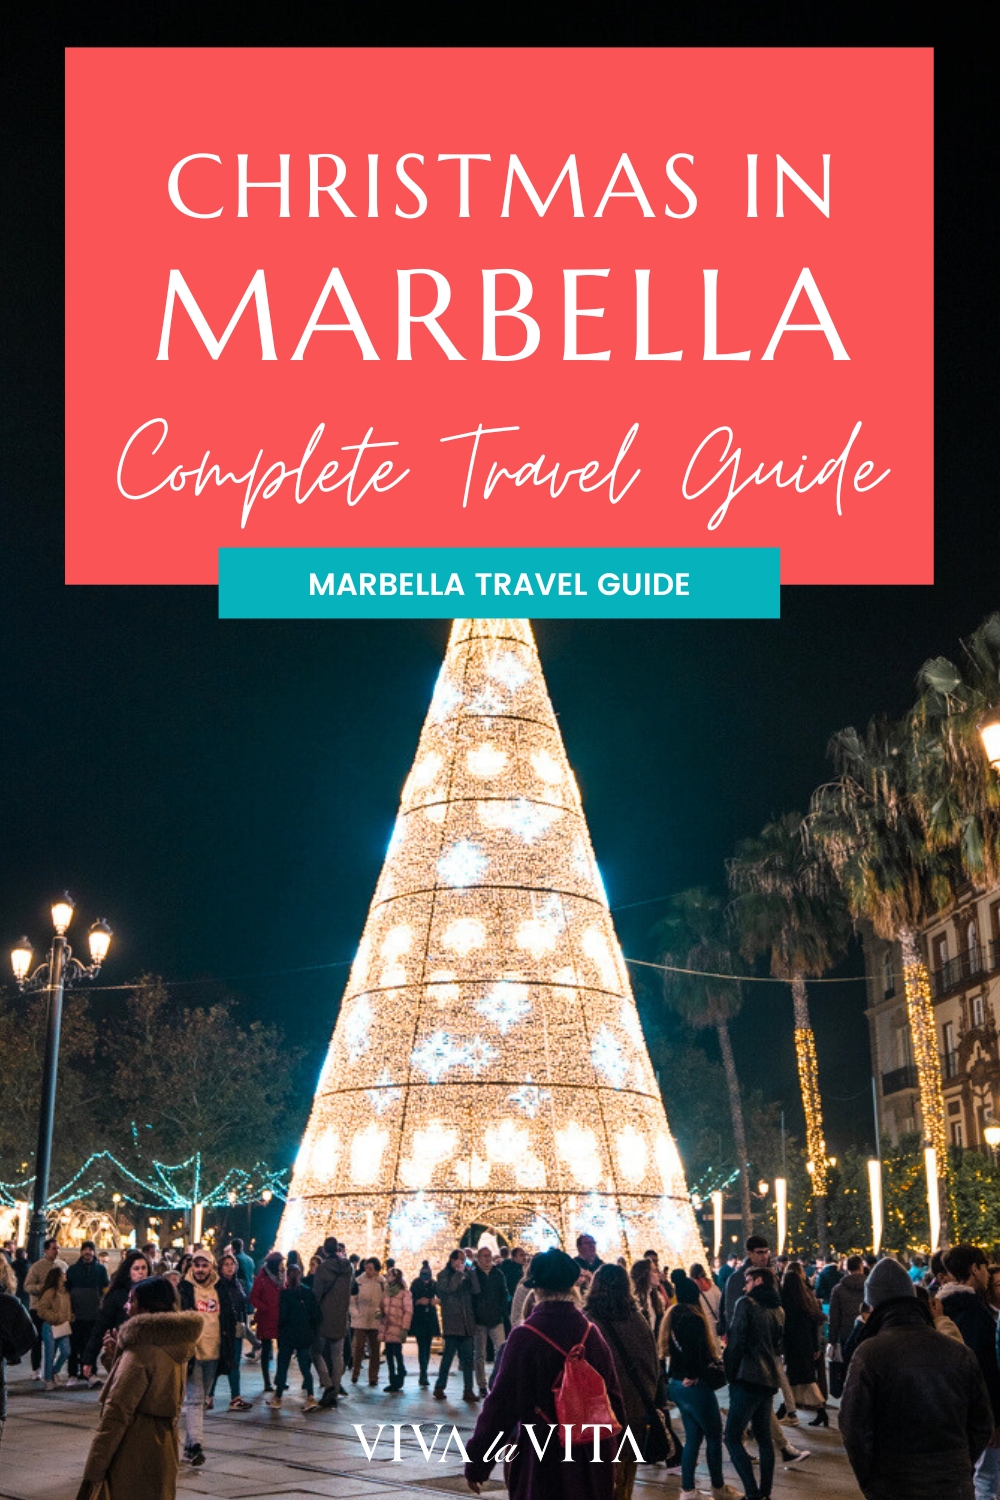 Pinterest image showing Christmas tree at night in Marbella, with a headline that reads: Christmas in Marbella, Complete Travel Guide - Marbella Travel Guide